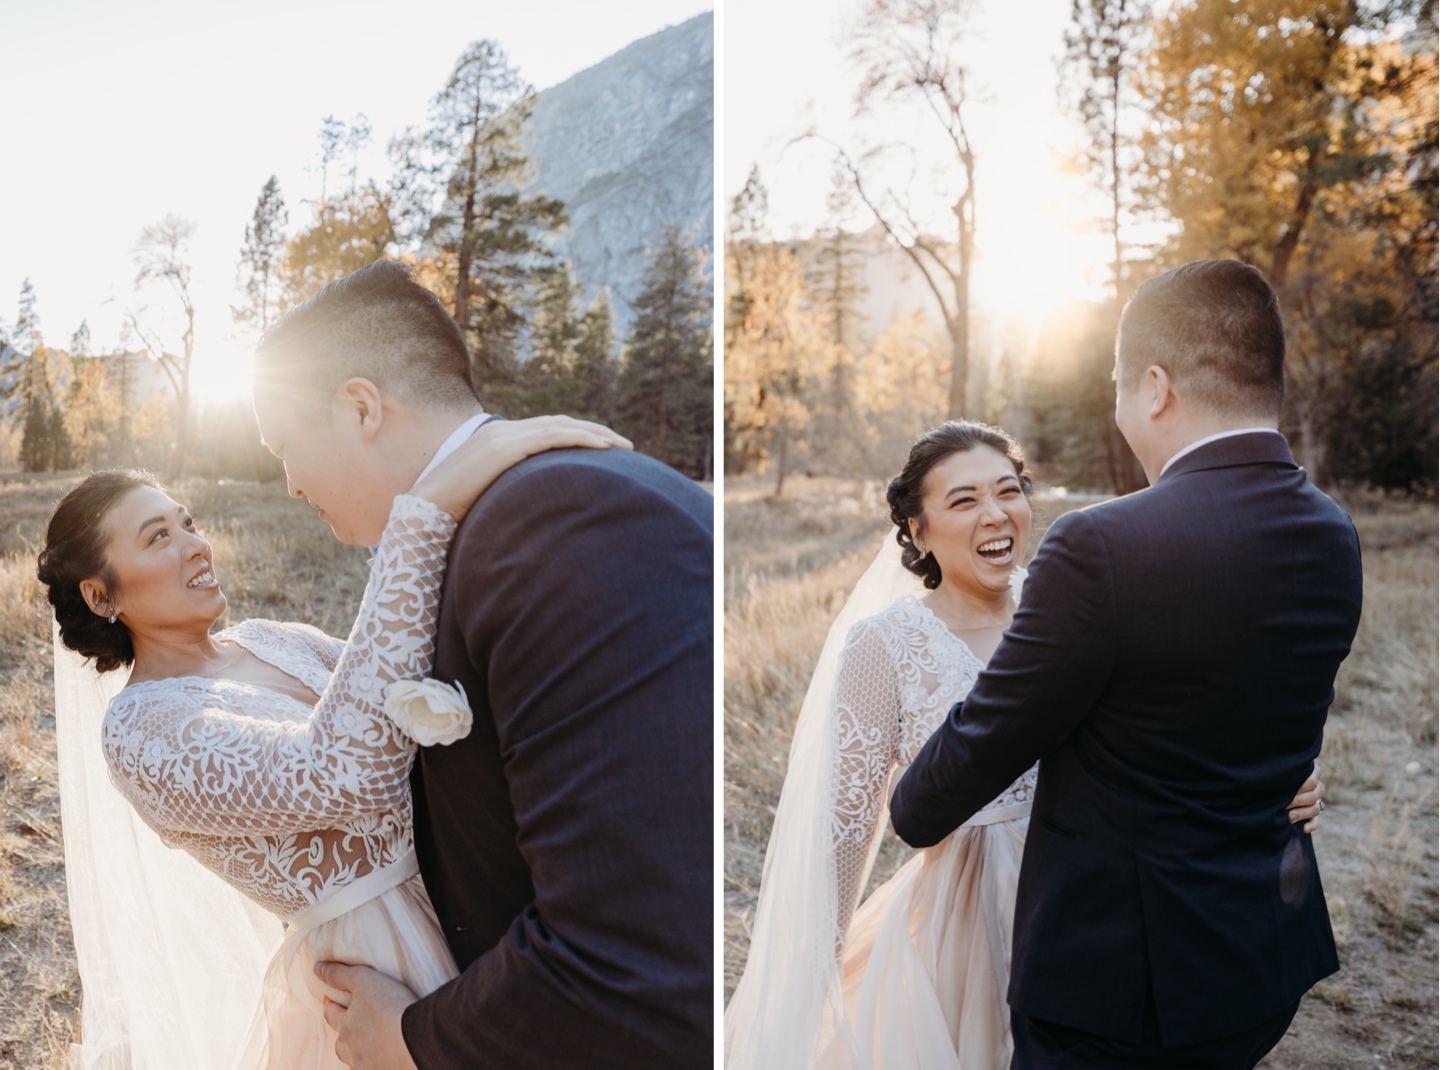 Bride and groom smile in a warm embrace as the sun is setting in Yosemite National Park